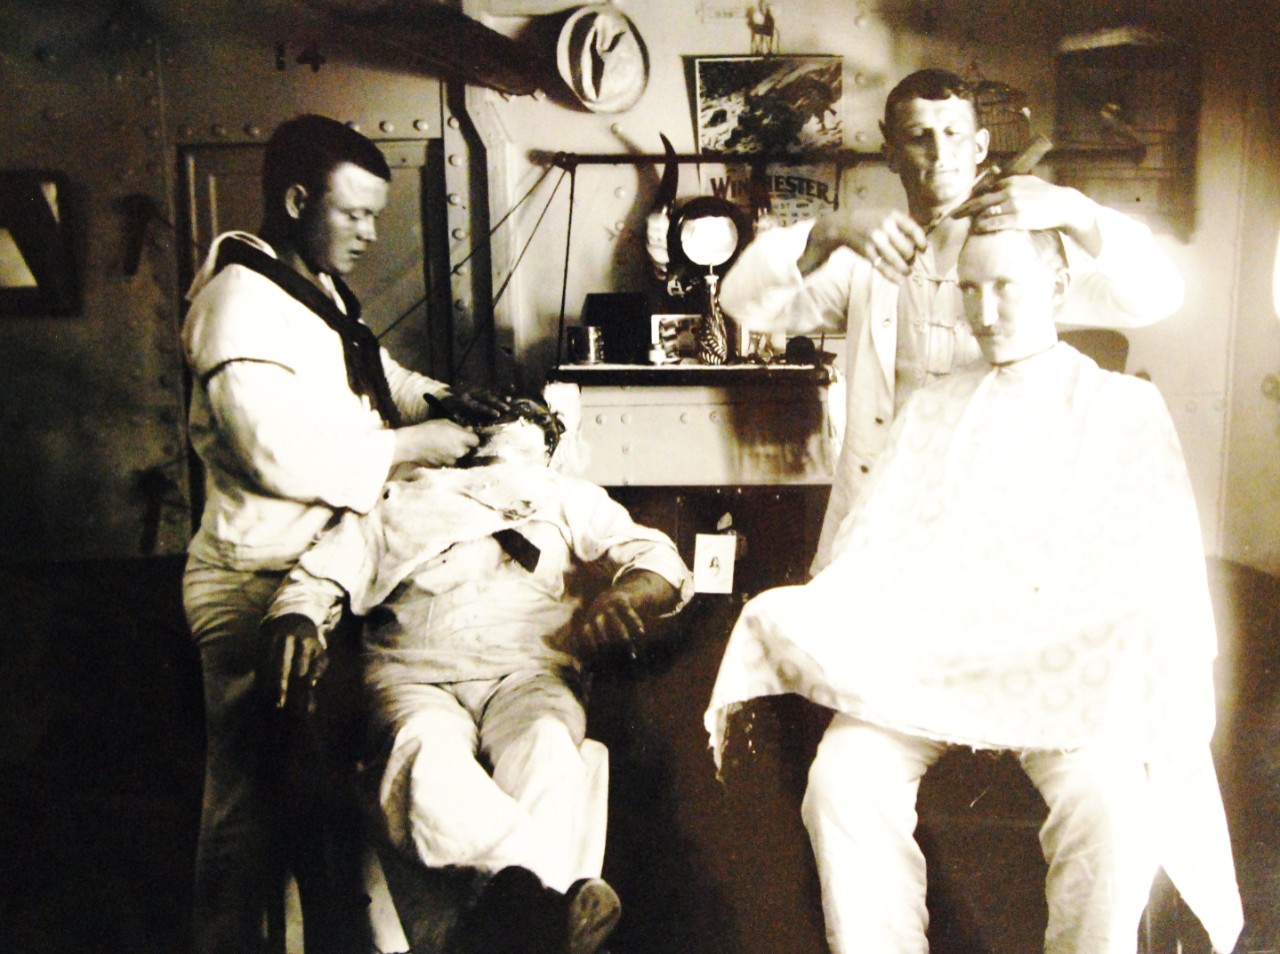 LC-J698-61314: USS Olympia (Cruiser #6), 1899.   Barbershop, circa 1899.  Photograph by Francis B. Johnston.  Courtesy of the Library of Congress, Lot 8688.    (2015/5/15).